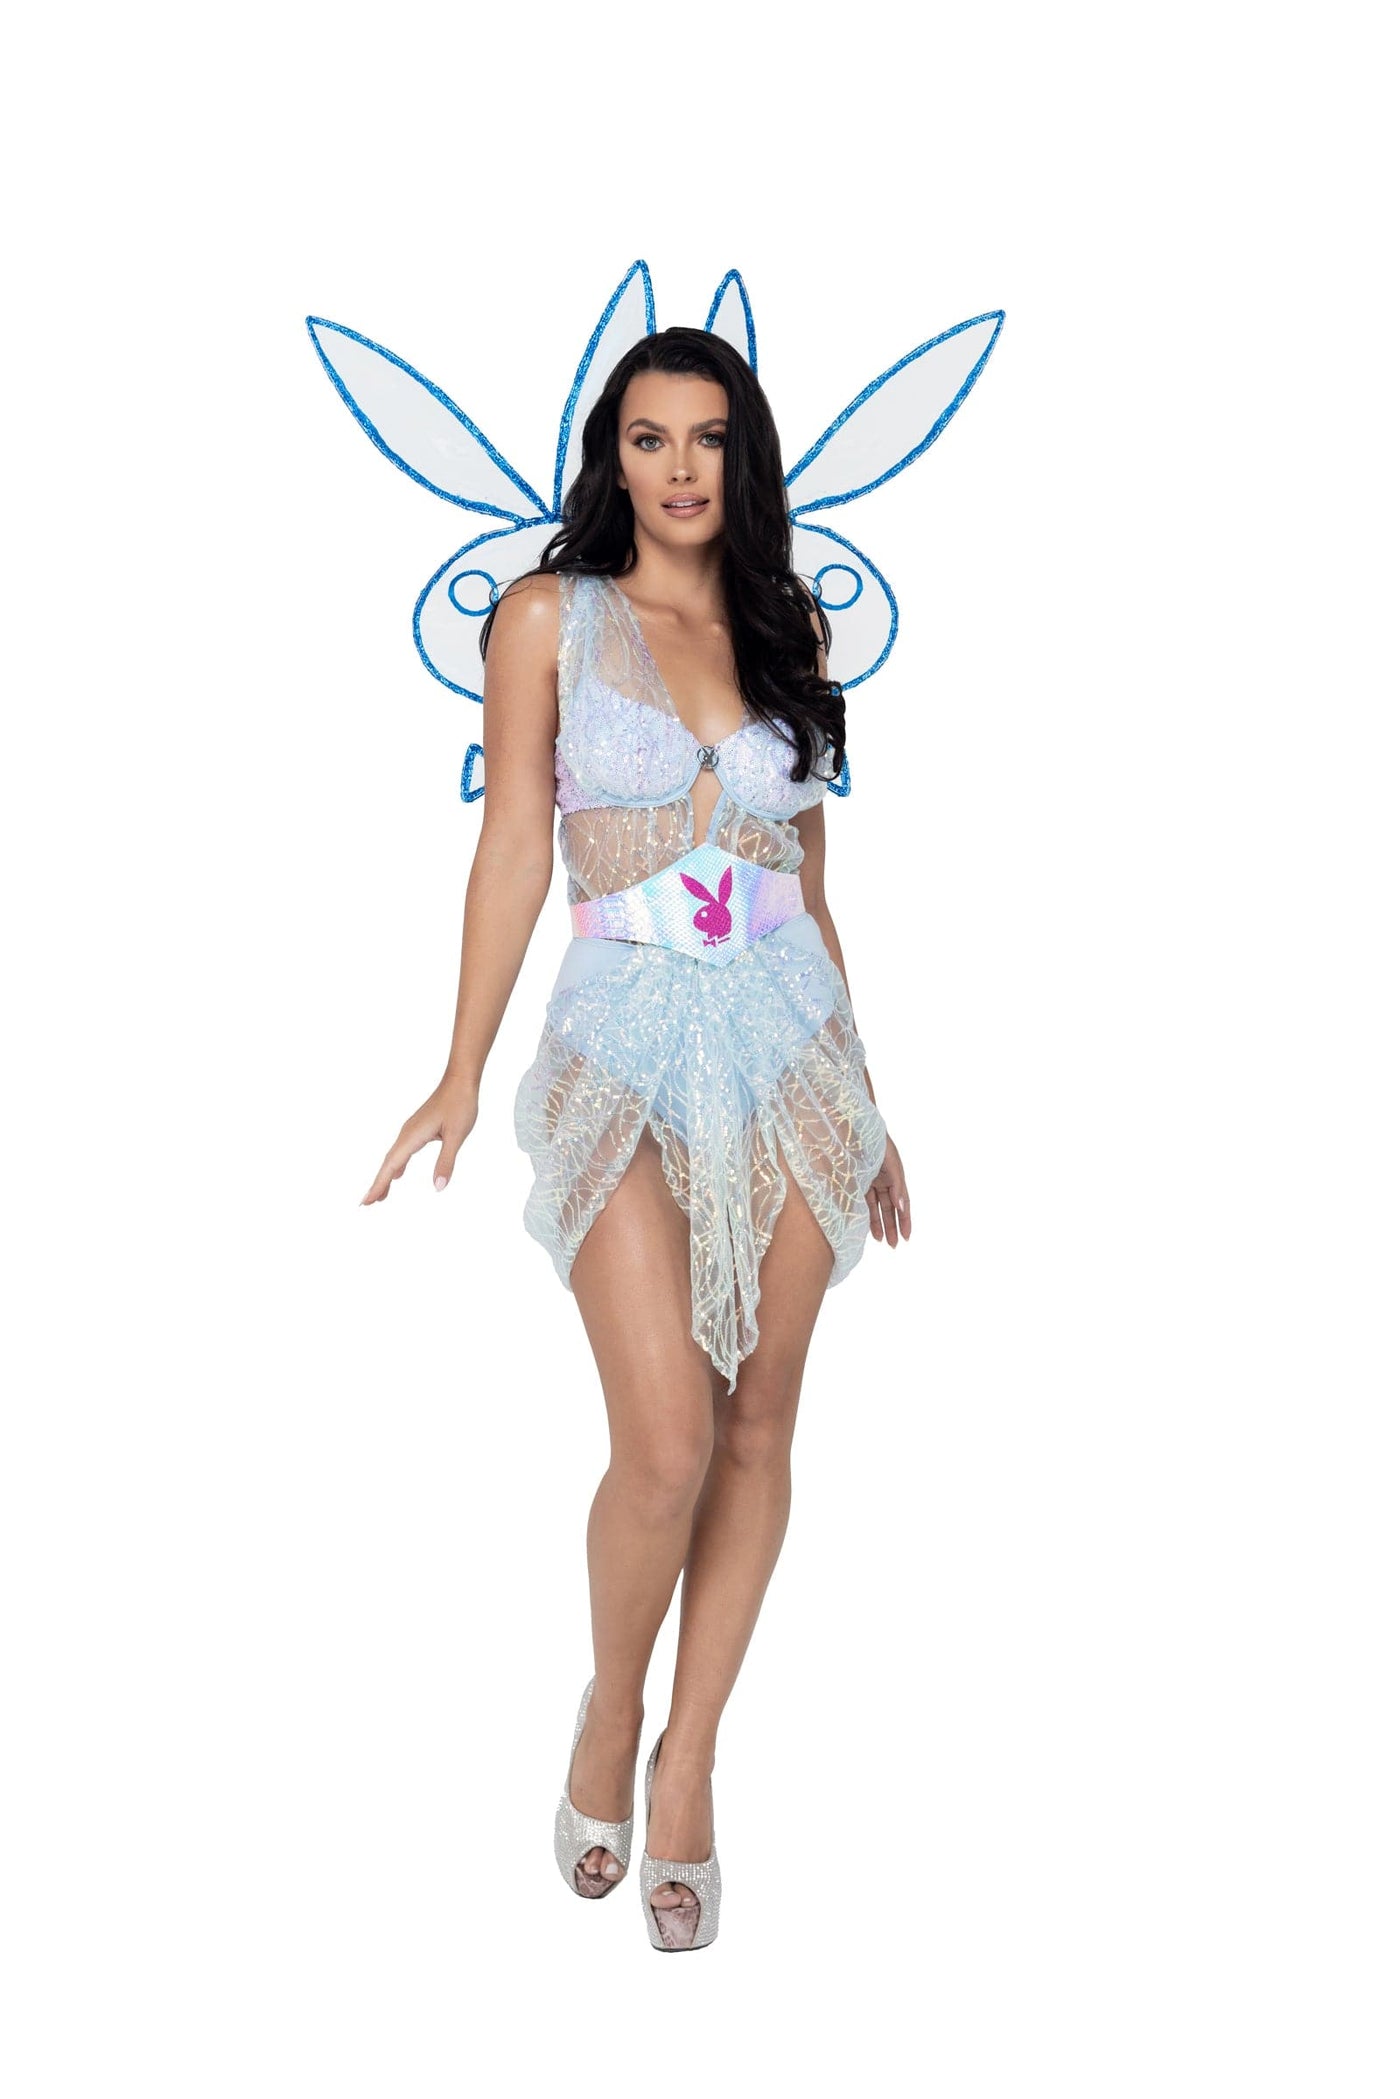 1pc. Official Playboy Bunny Logo Fairy Wings Costume Accessories - For Love of Lingerie